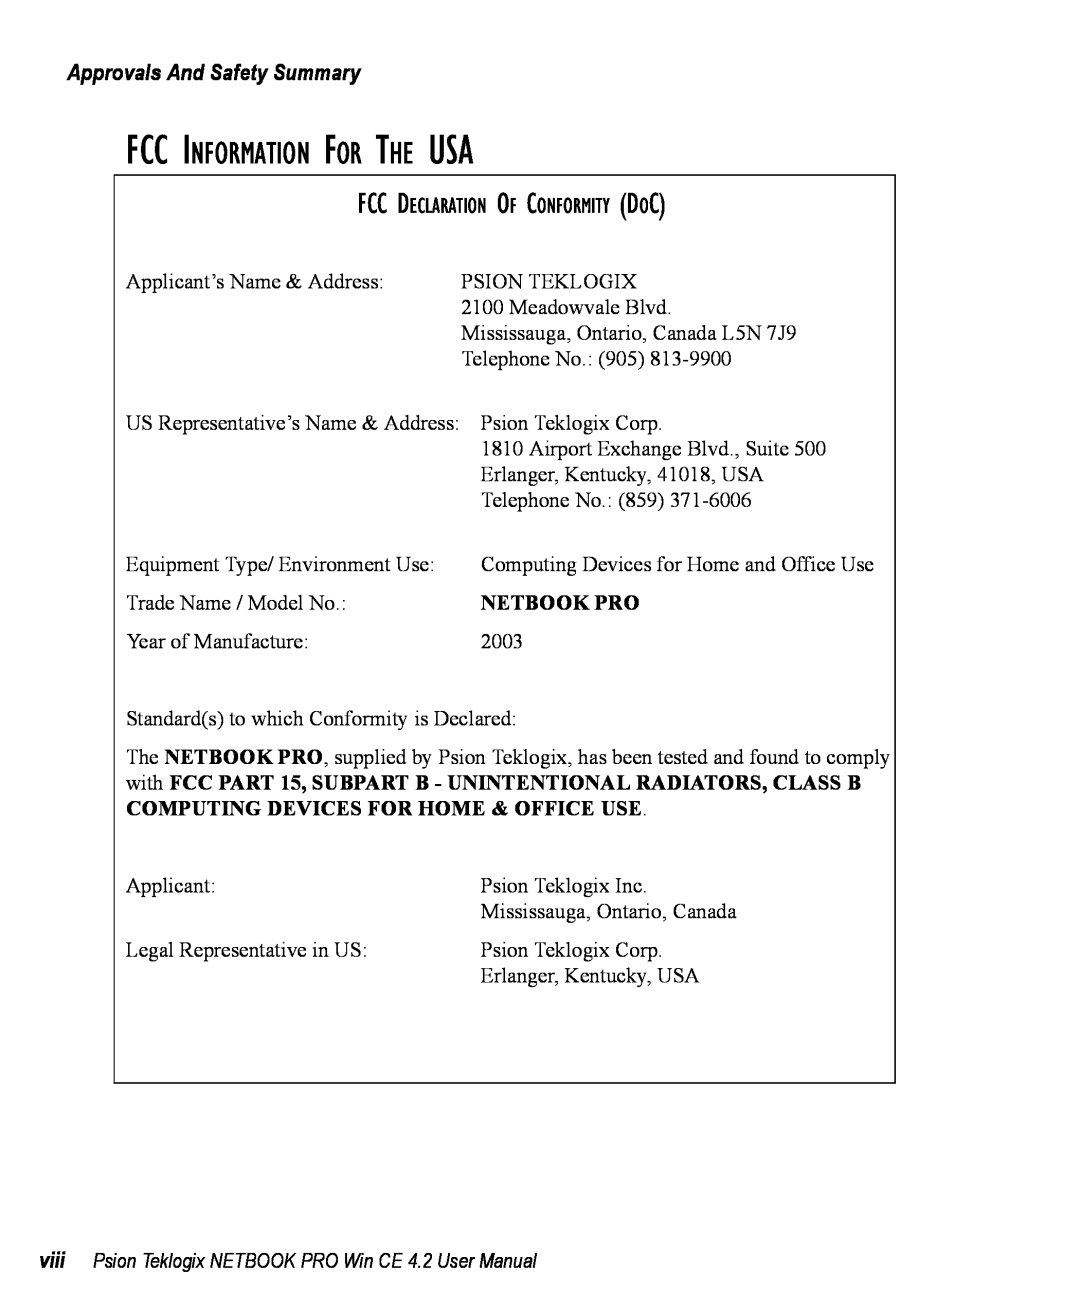 Psion Teklogix Win CE 4.2 Fcc Information For The Usa, Approvals And Safety Summary, Fcc Declaration Of Conformity Doc 